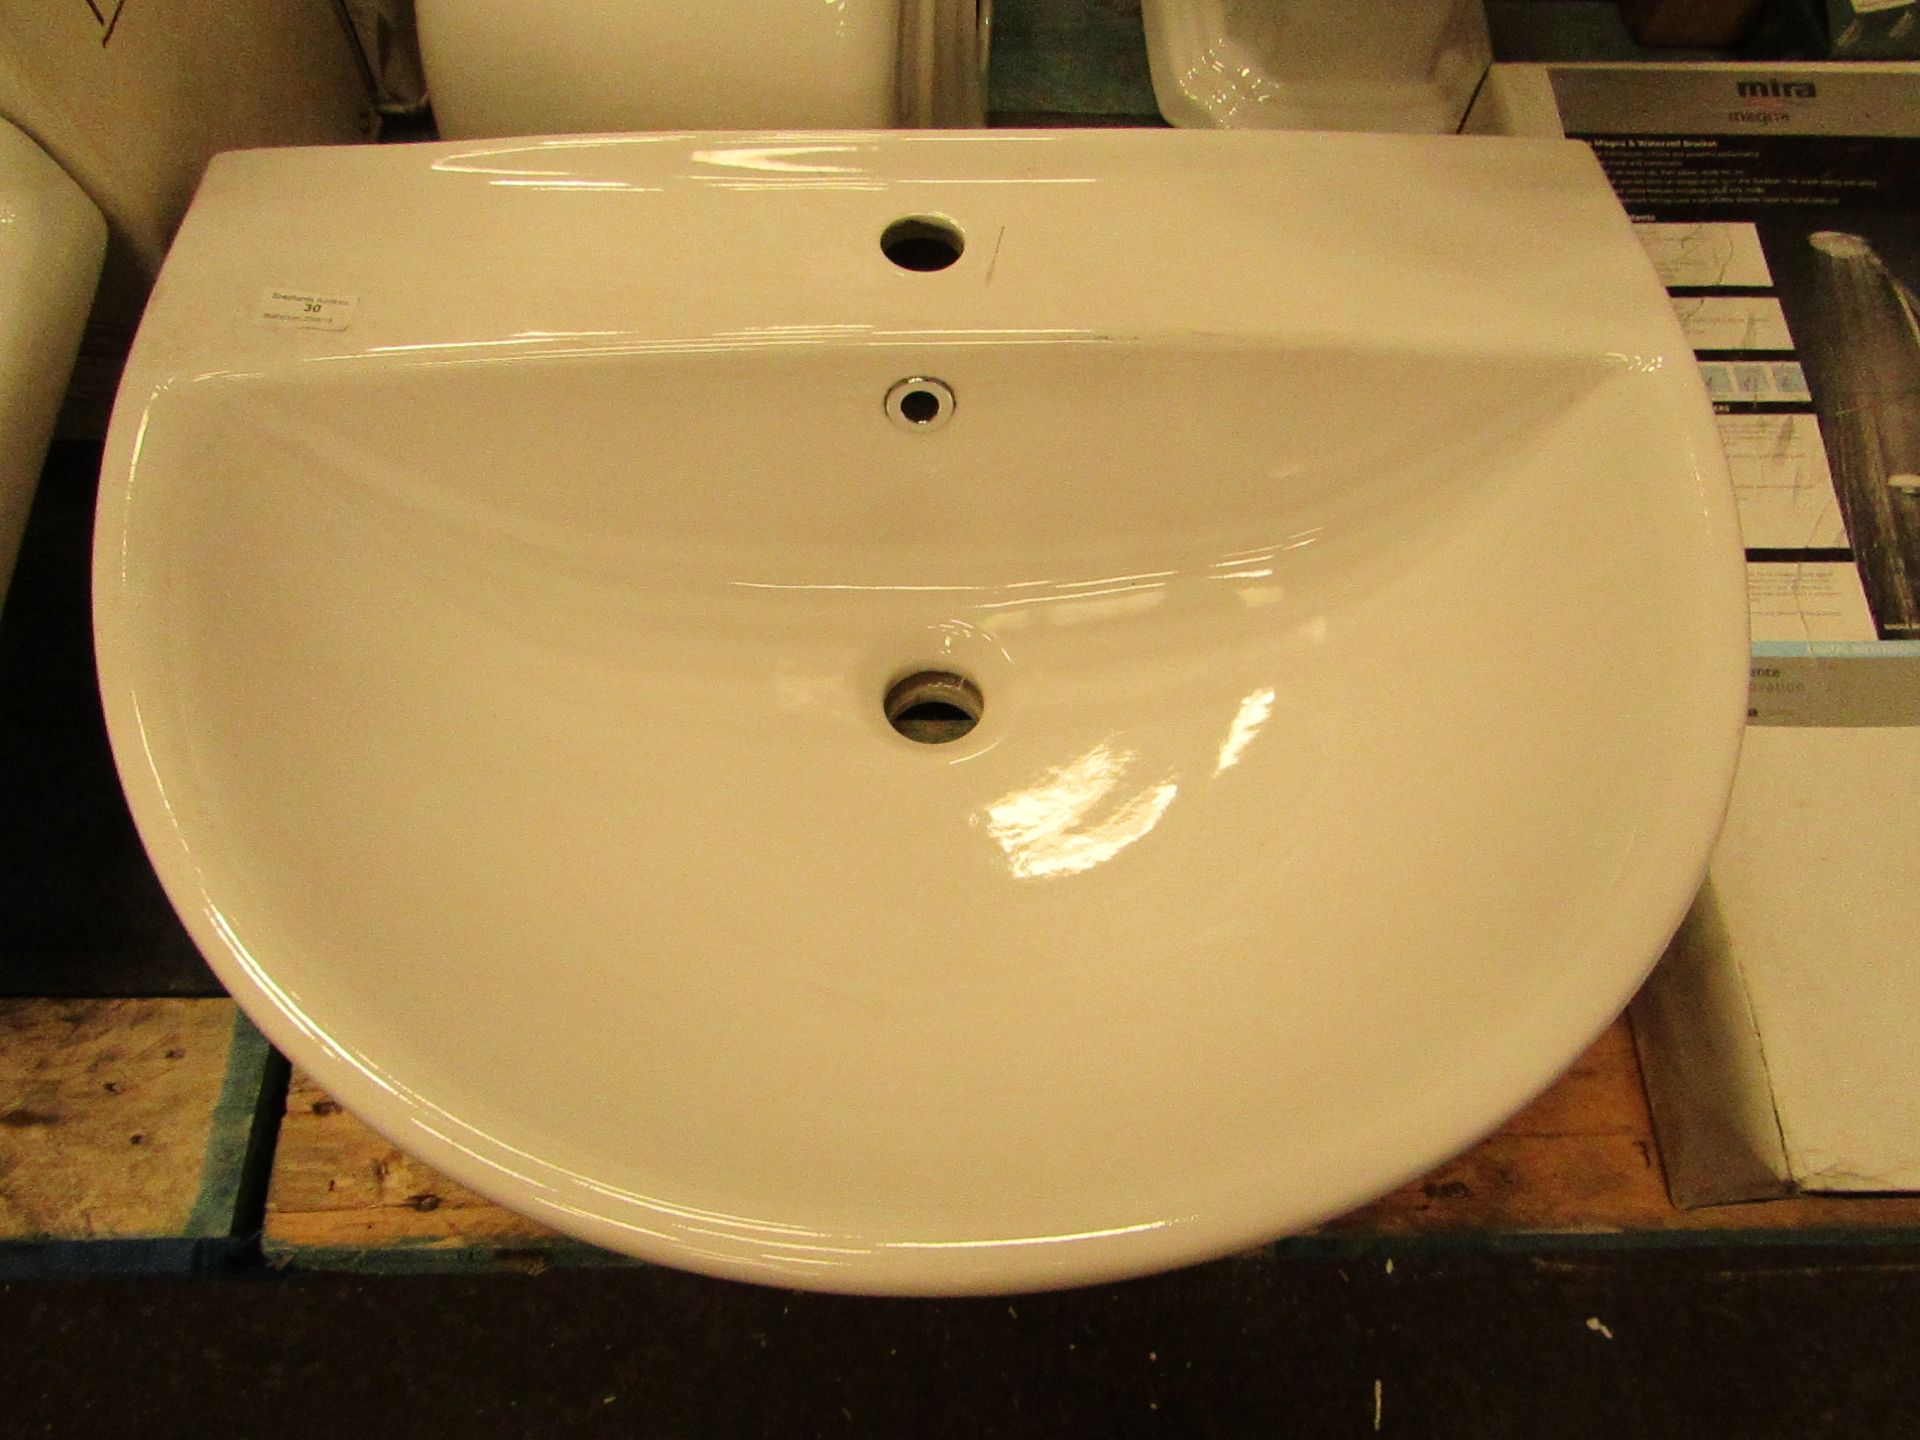 Roca 1TH basin with overflow, brand new.